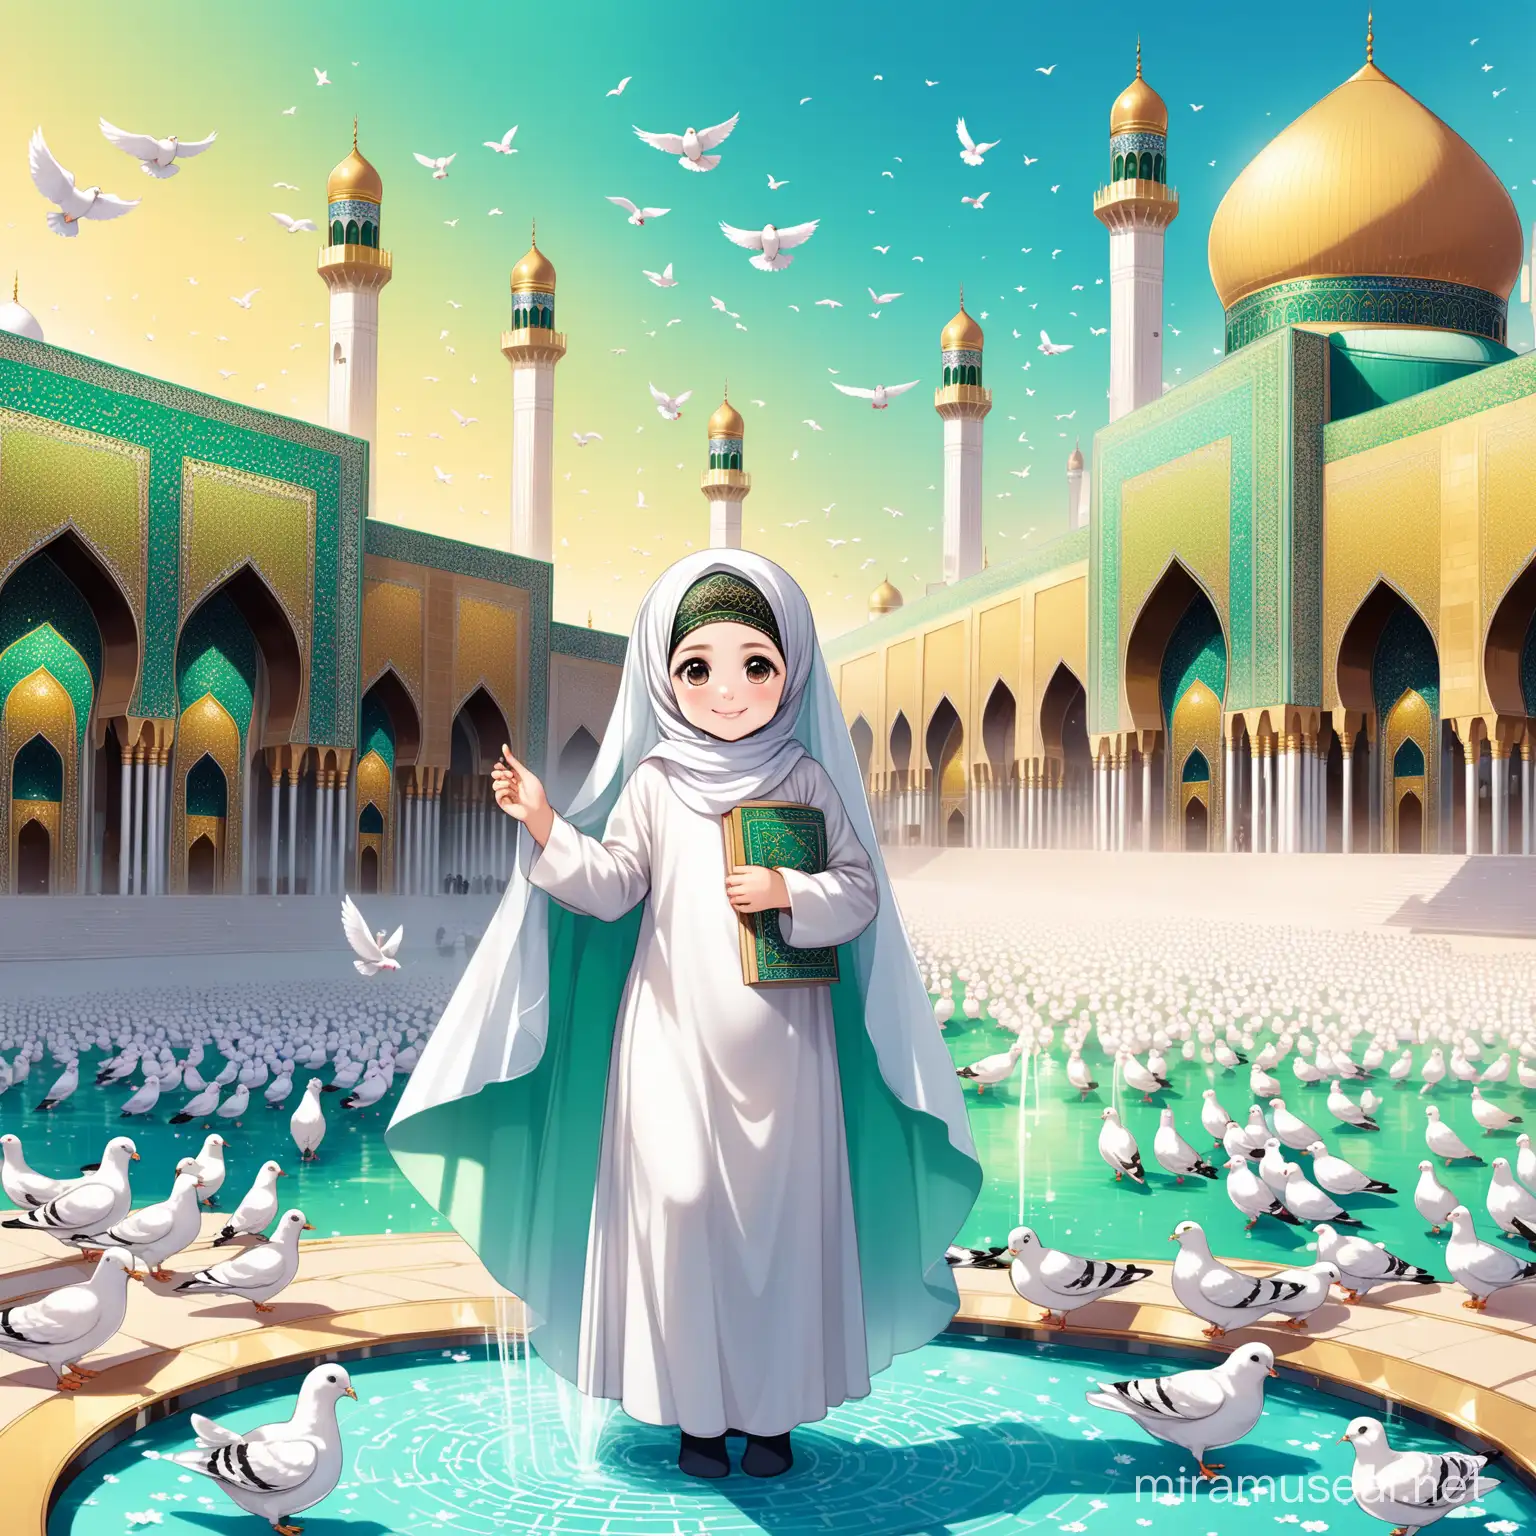 Character Persian little girl(full height, Big white flag in one hand proudly, baby face, Muslim, with emphasis no hair out of veil(Hijab), smaller eyes, bigger nose, white skin, cute, smiling, wearing socks, clothes full of Persian designs).

Atmosphere beautiful shrine of Imam Reza, yard, pond with water fountain, many pigeons, colorful, nobody.